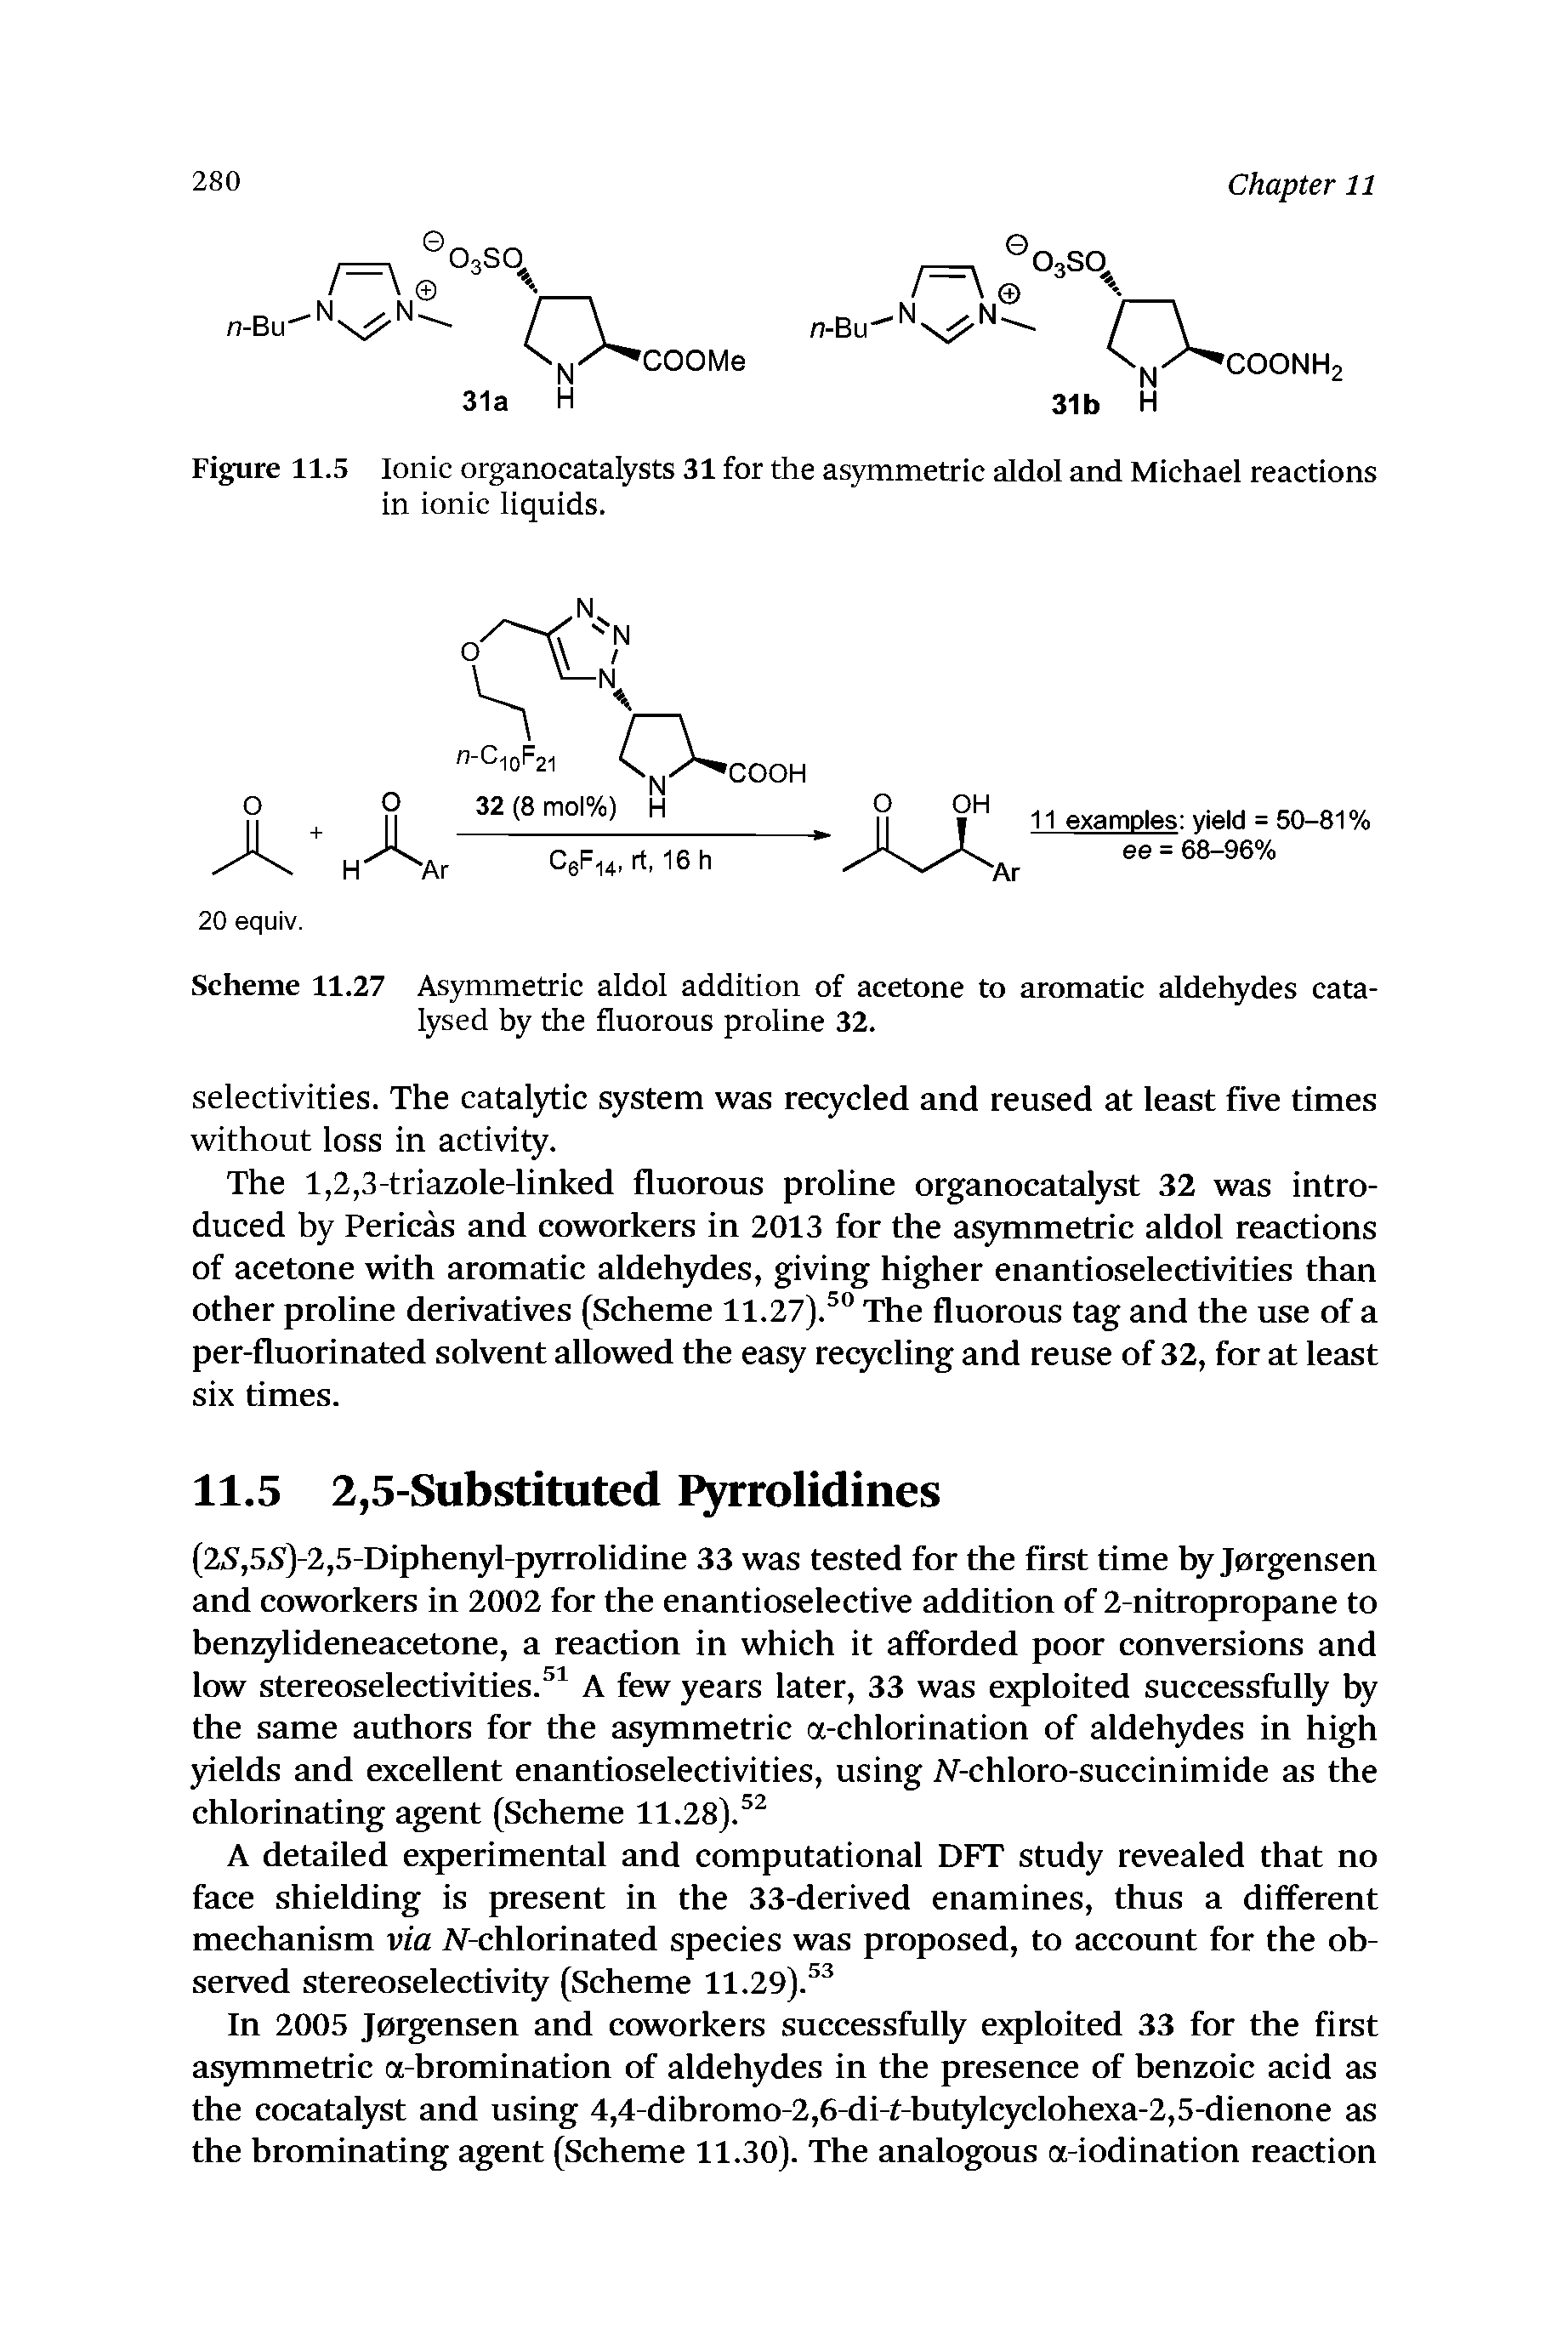 Figure 11.5 Ionic organocatalysts 31 for the asymmetric aldol and Michael reactions in ionic liquids.